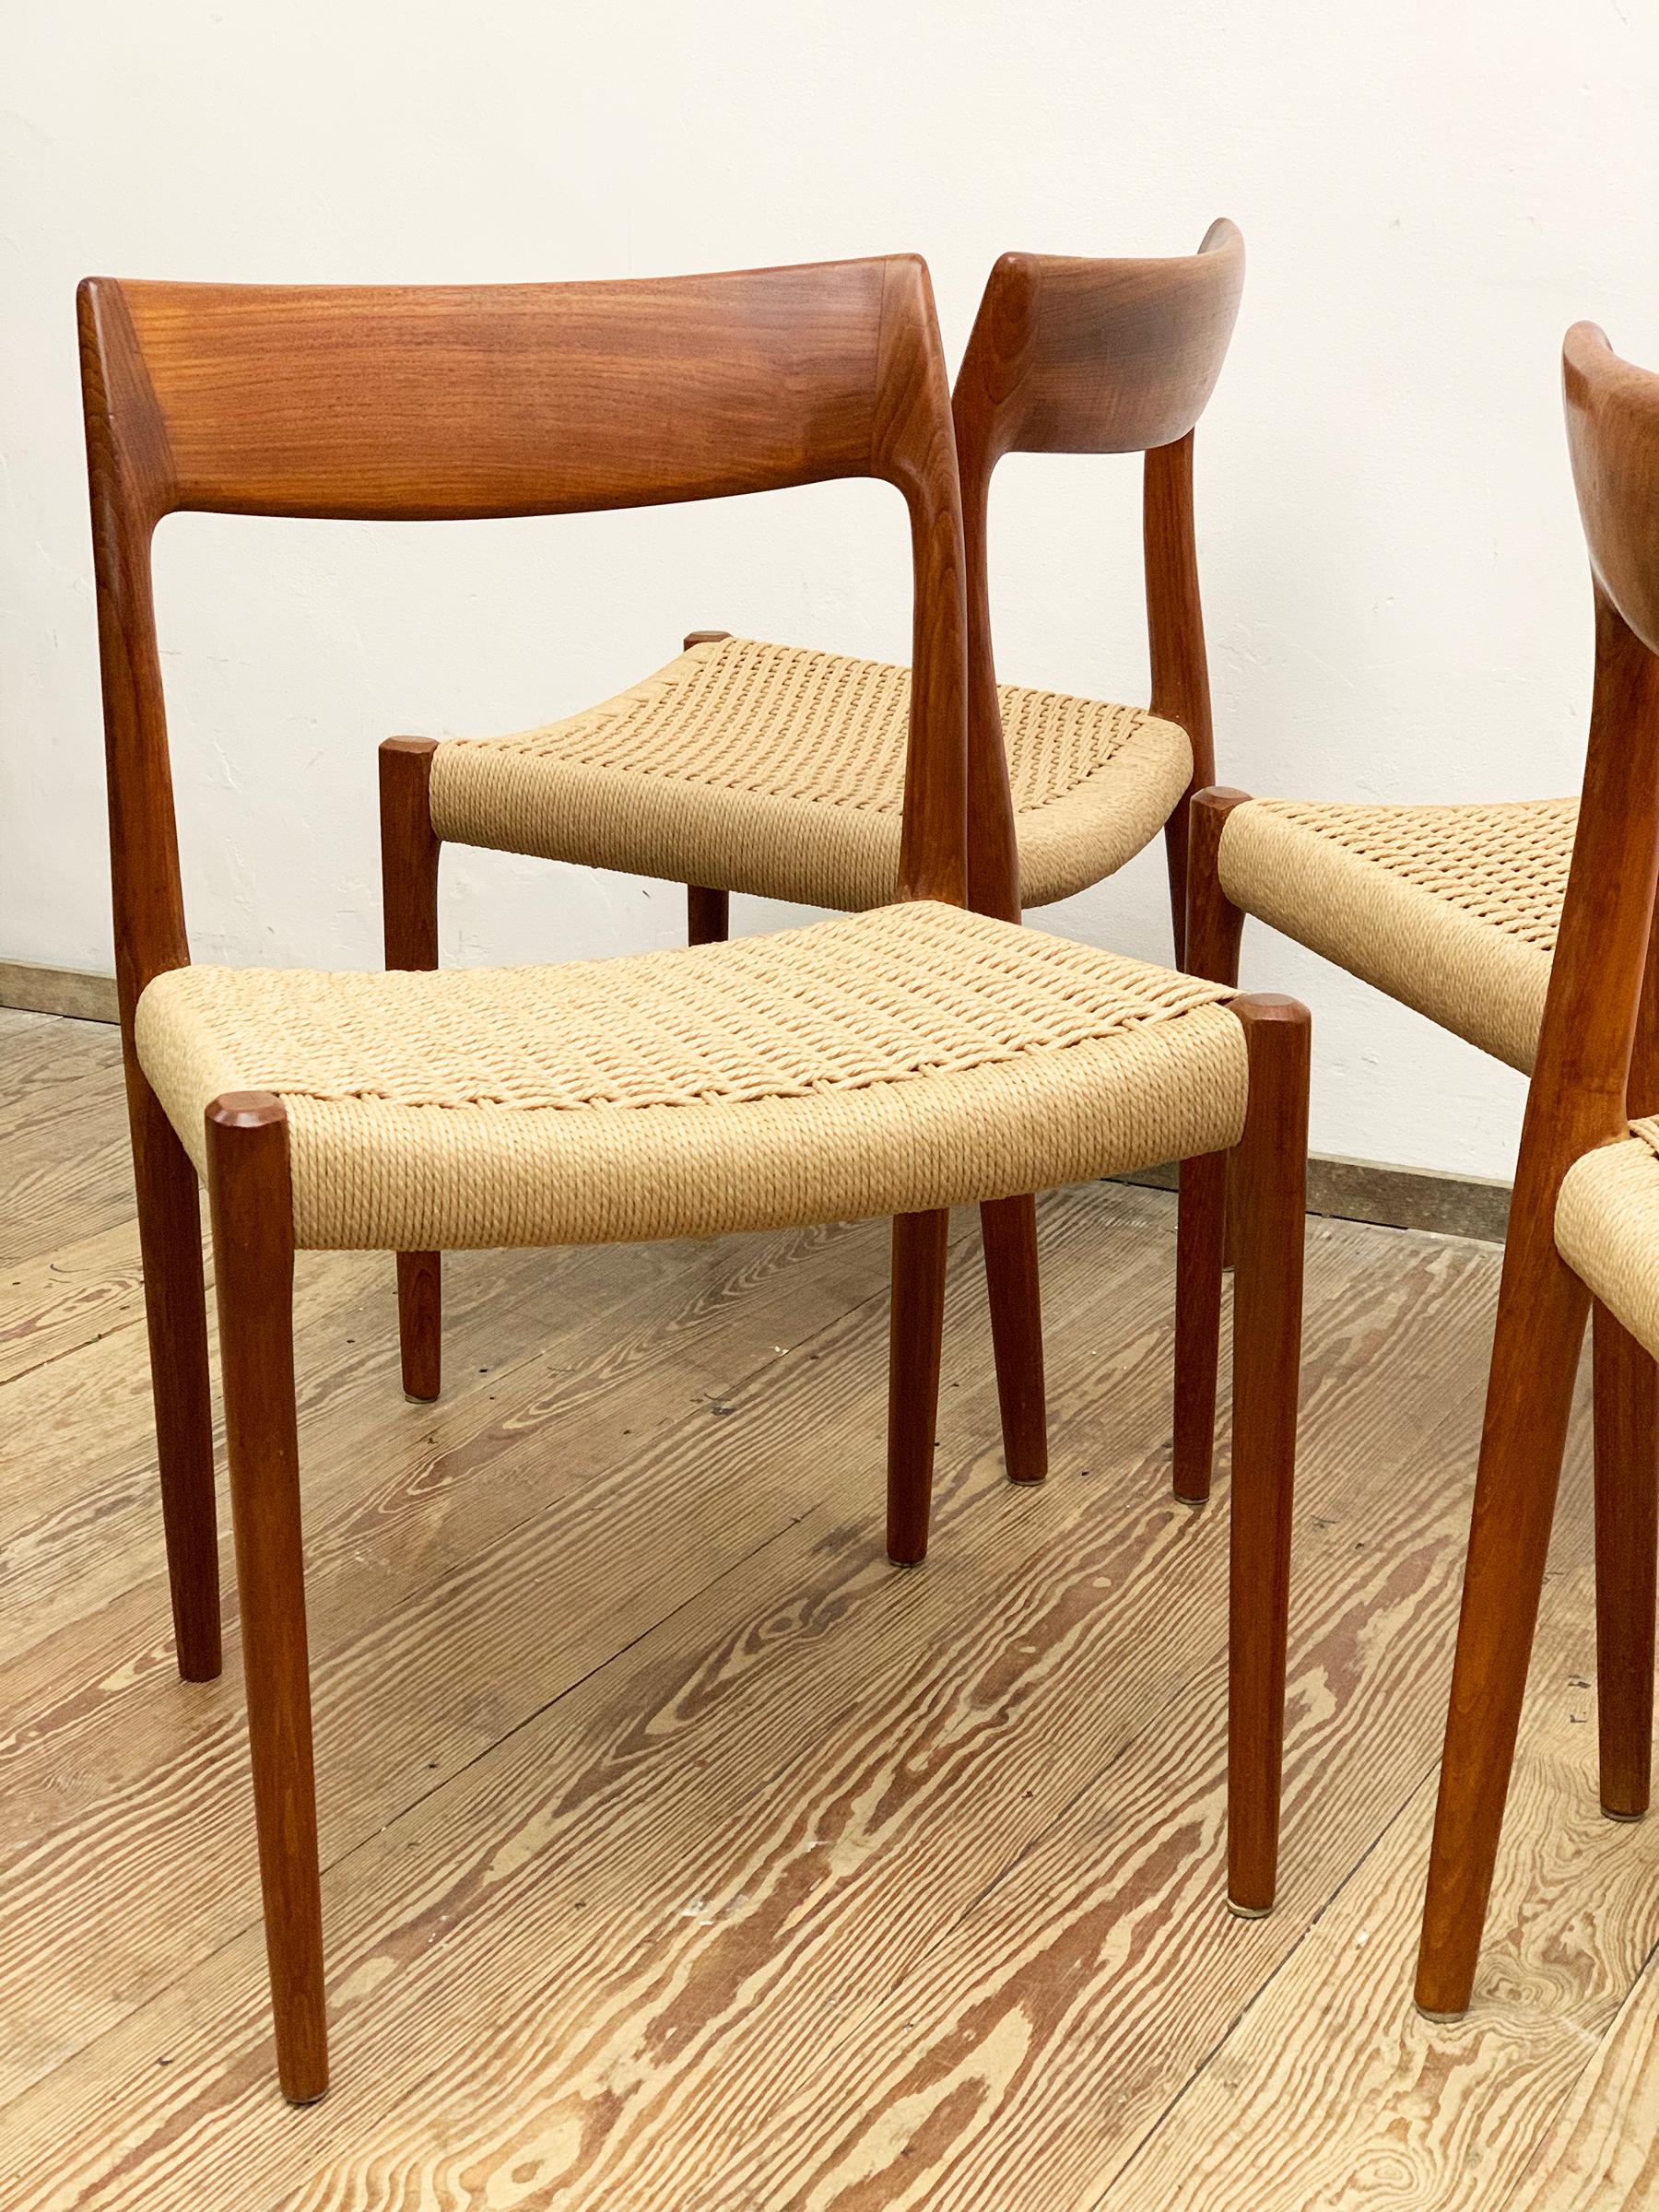 Mid-20th Century Mid-Century Teak Dining Chairs #77 by Niels O. Møller for J. L. Moller, Set of 4